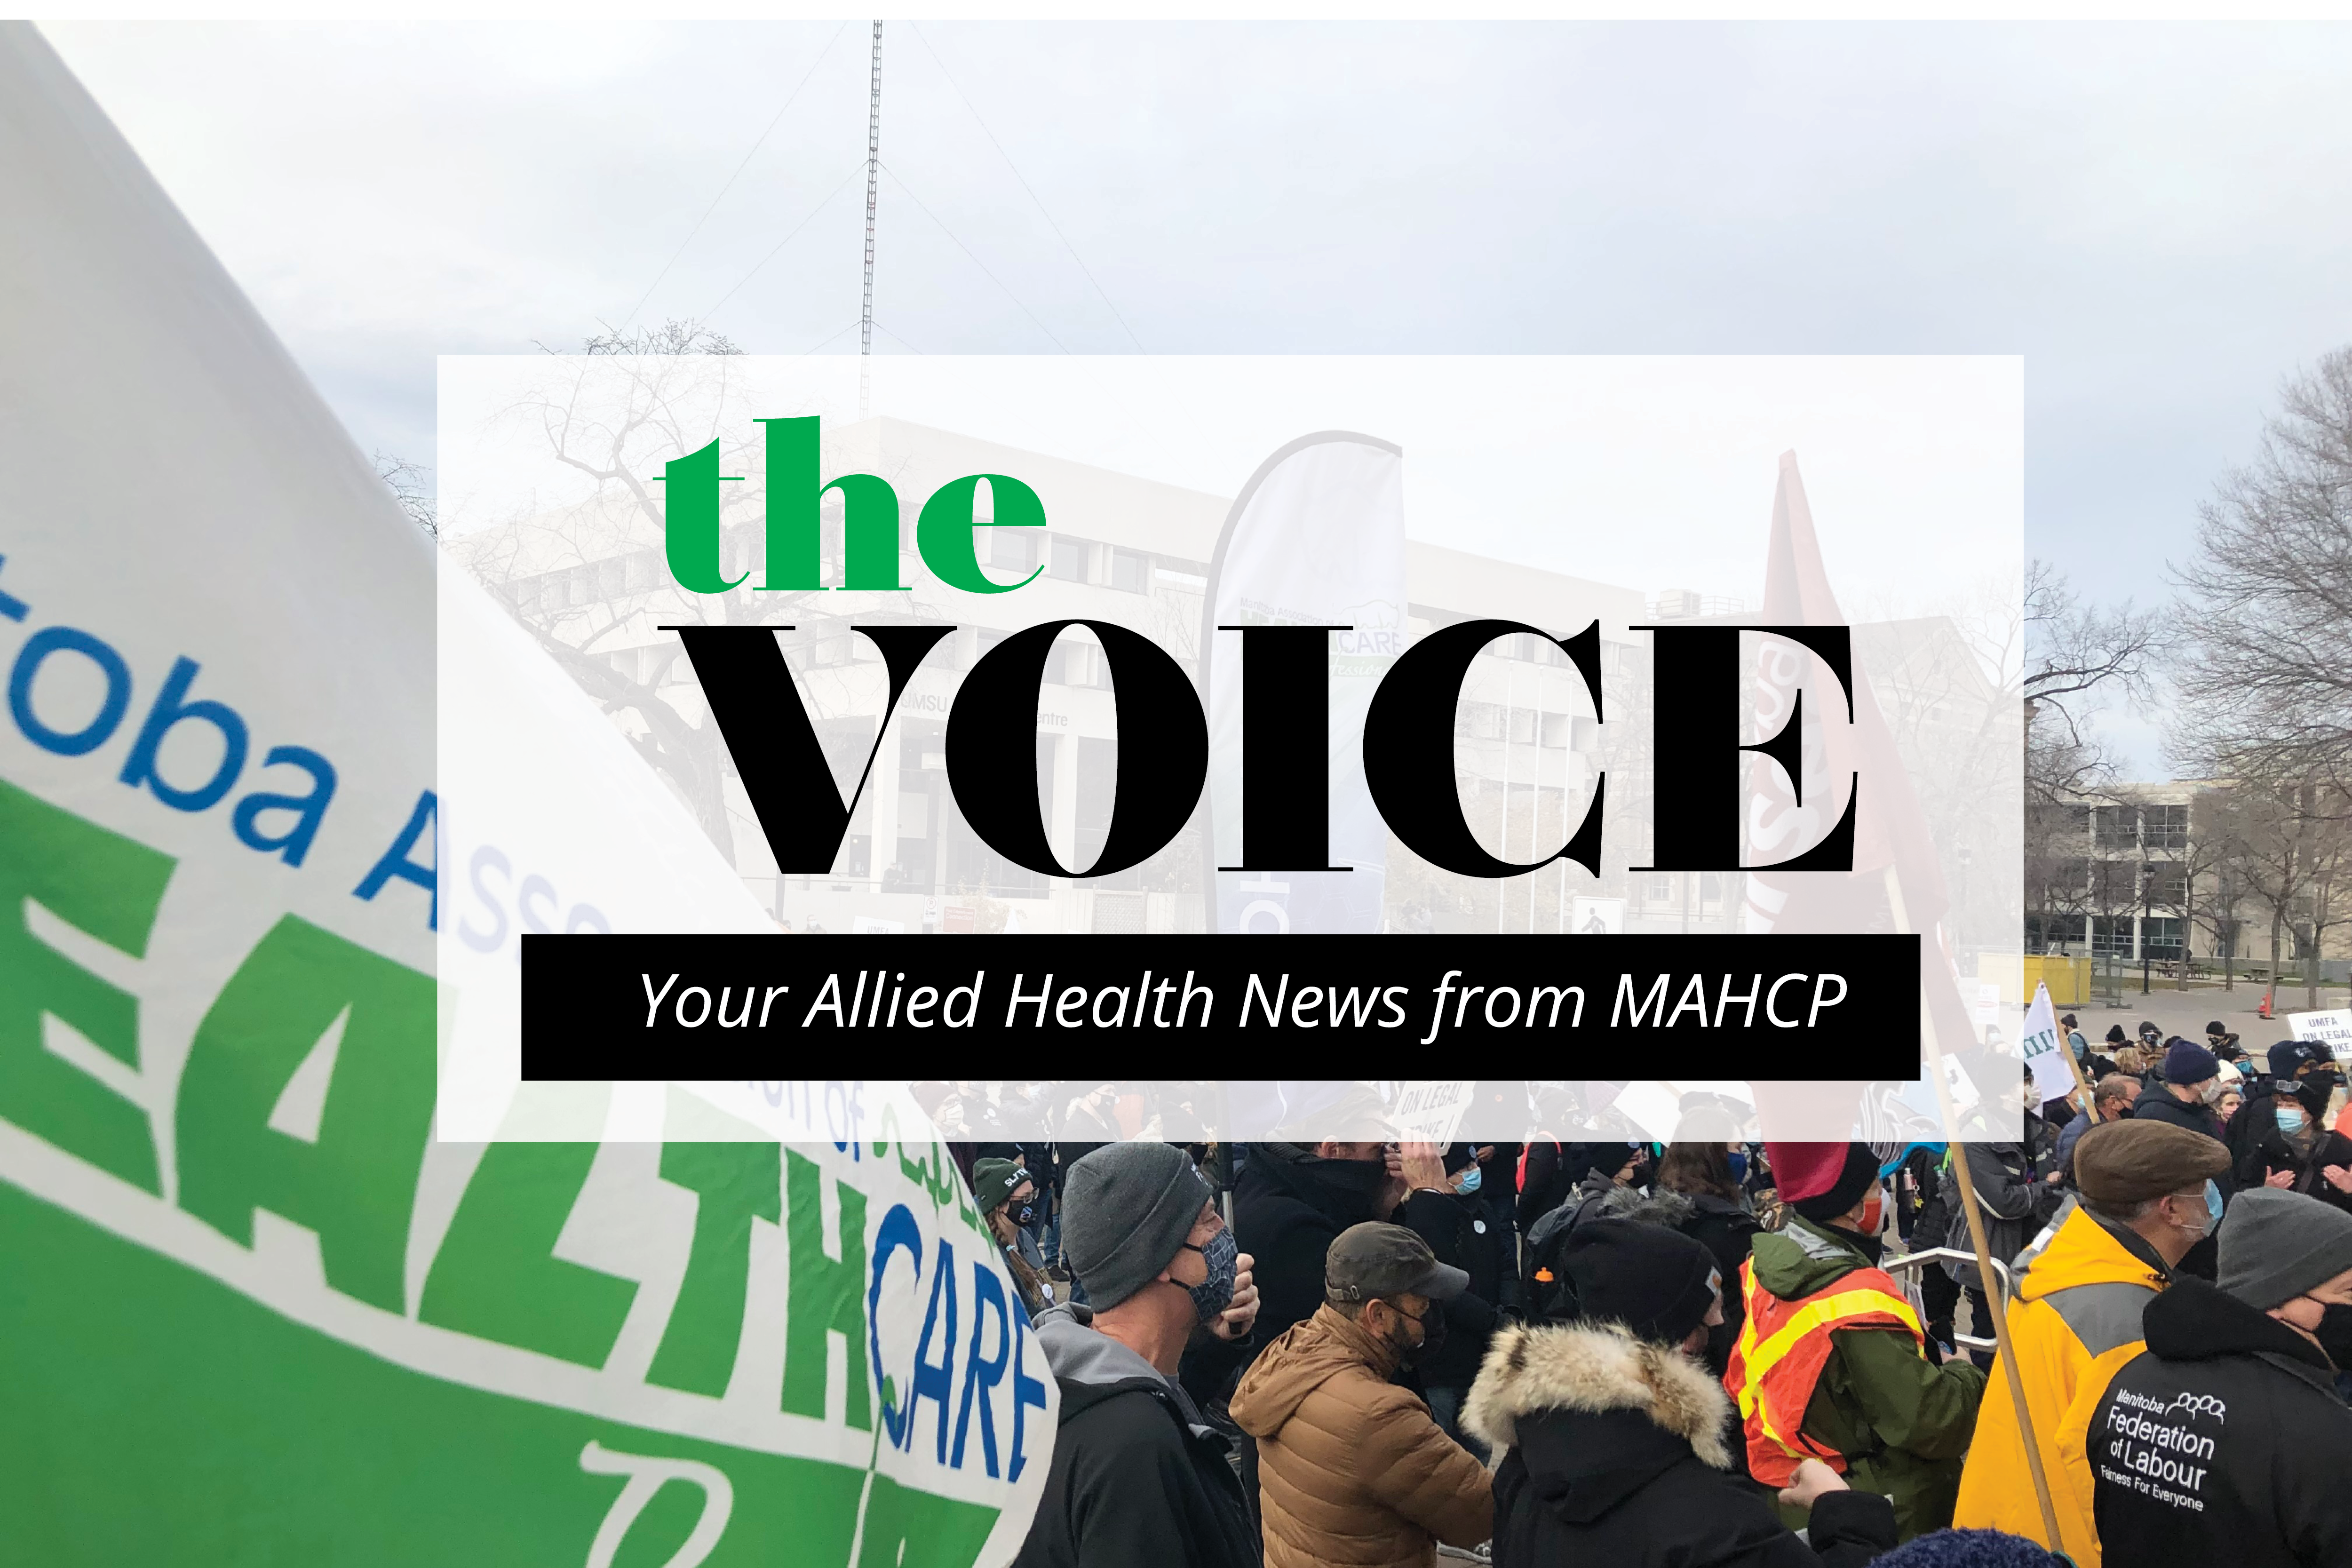 The fall edition of MAHCP’s Newsletter, The Voice, is here!